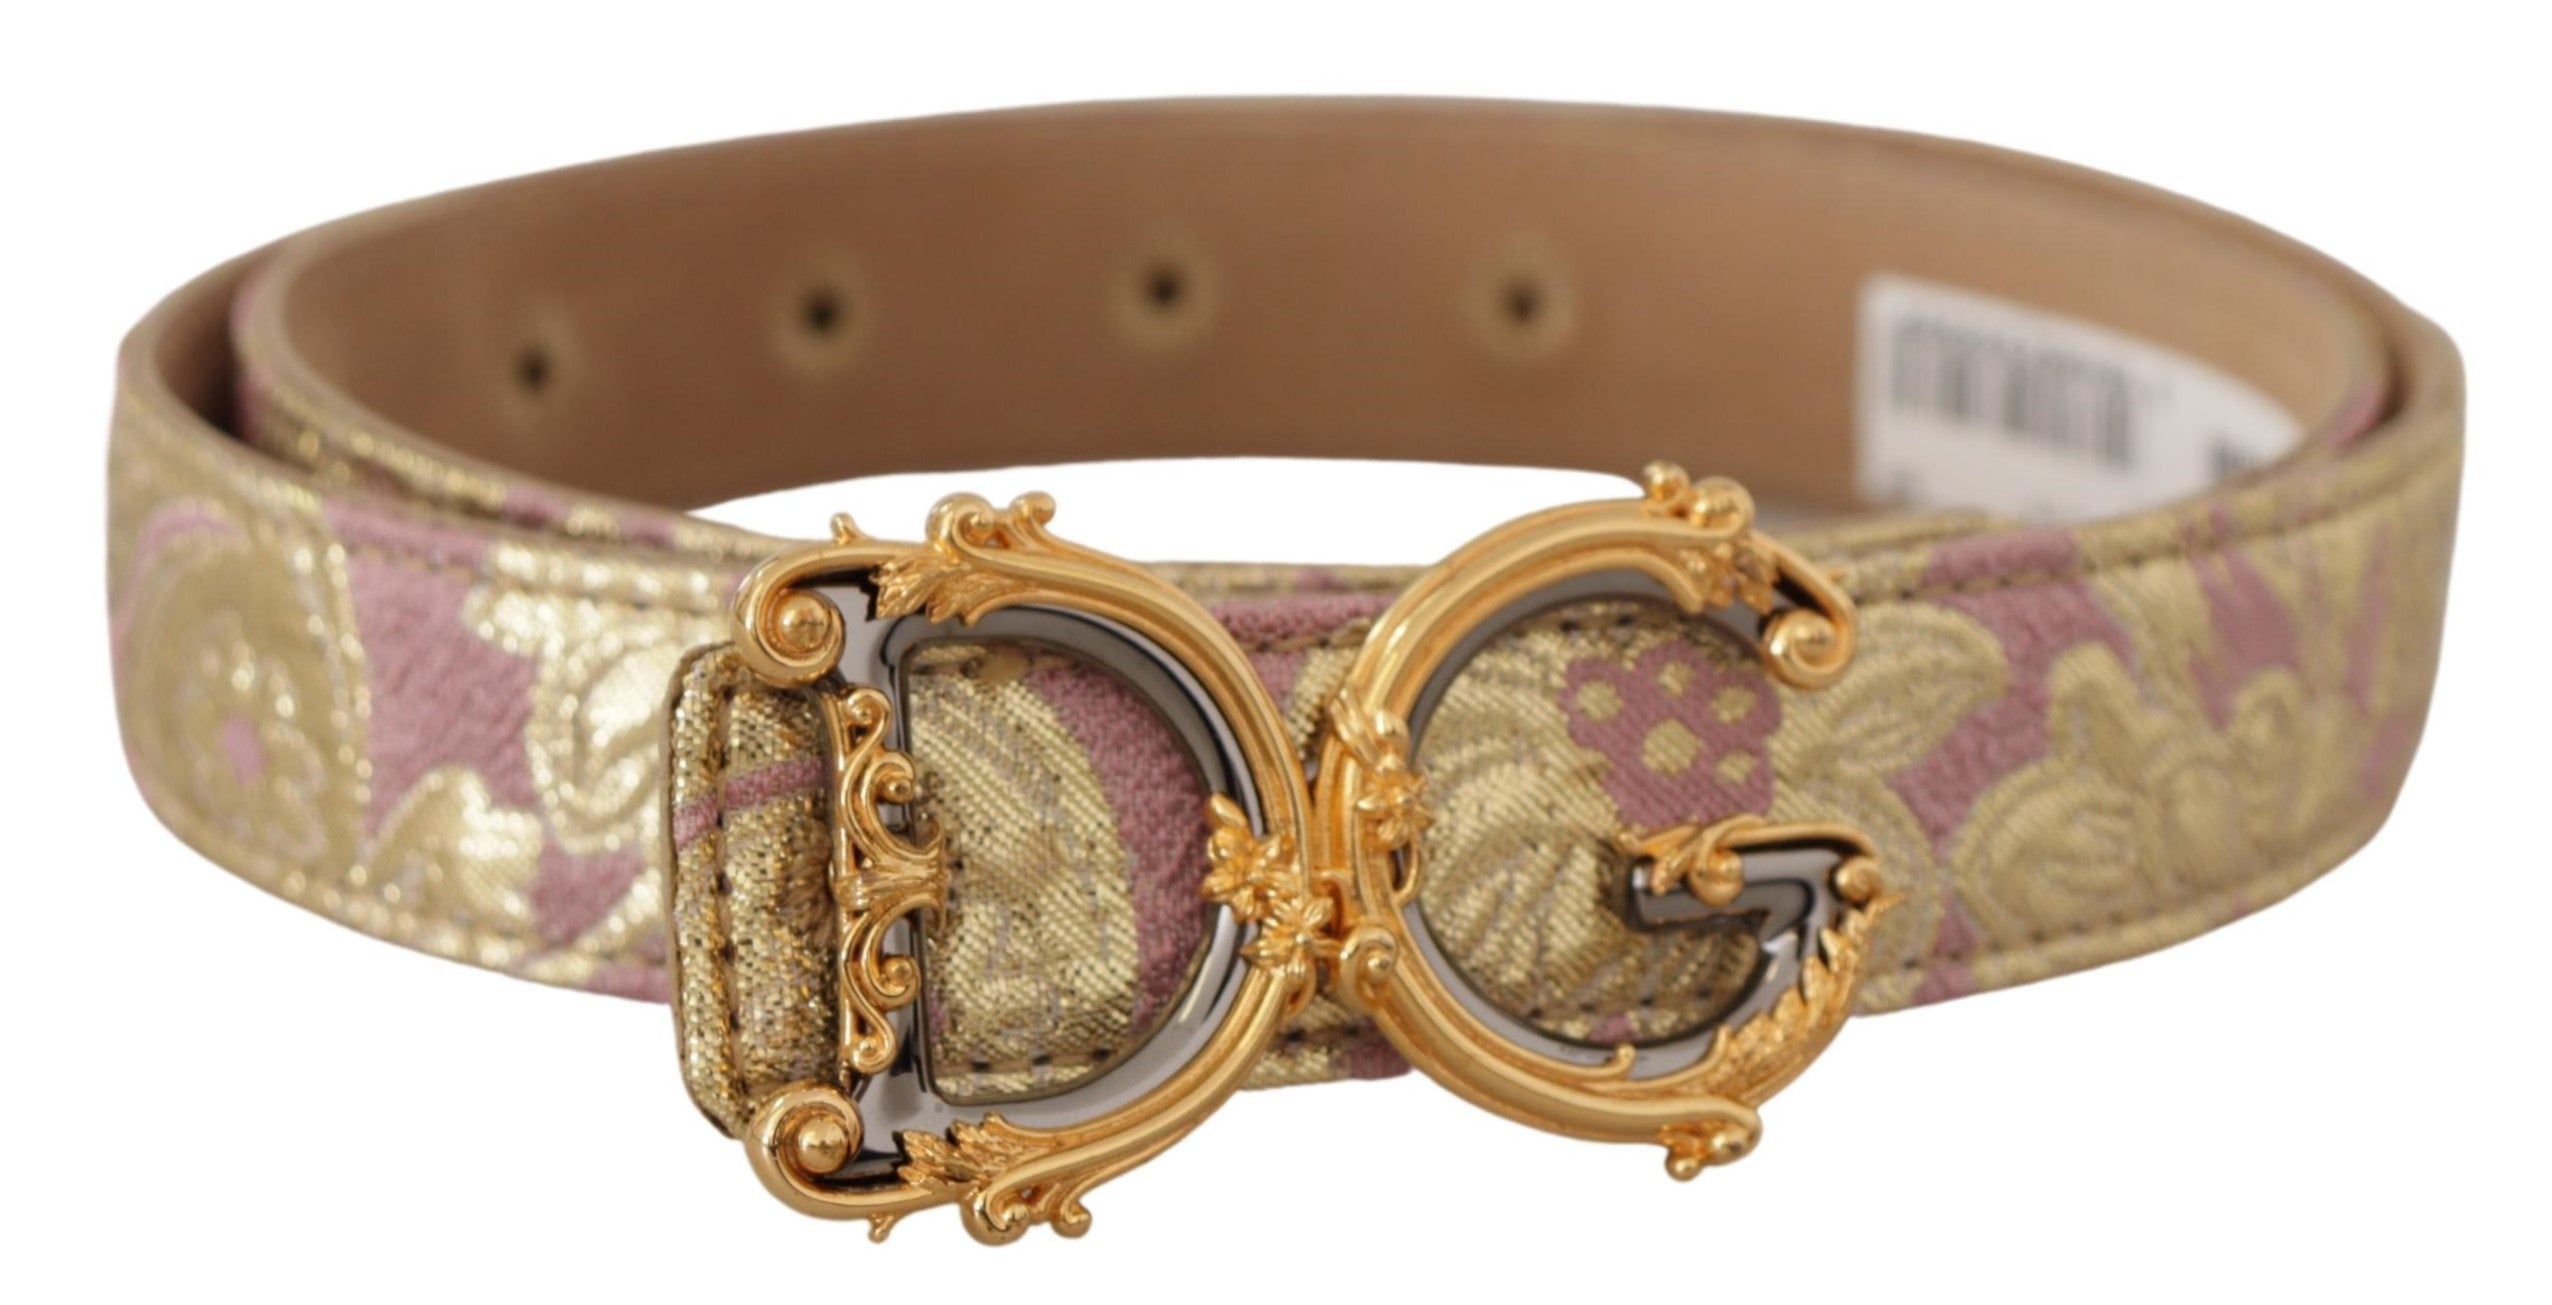 Dolce & Gabbana Chic Gold and Pink Leather Belt